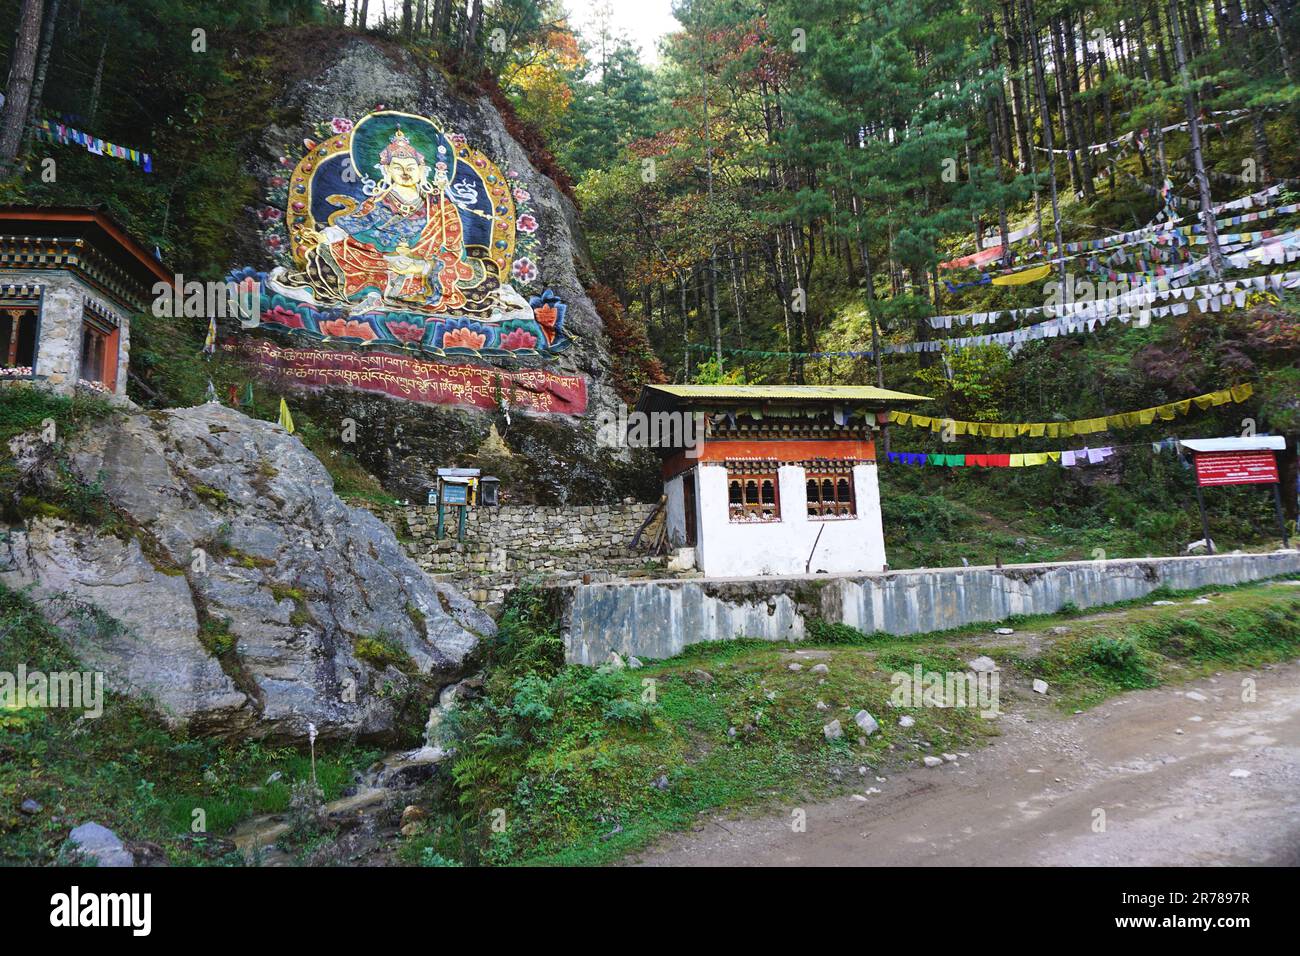 Image of Guru Rinpoche painted on a large boulder in Thimphu valley, Bhutan. Also known as Padmasambhava, he brought Buddhism to Bhutan around 800 AD. Stock Photo